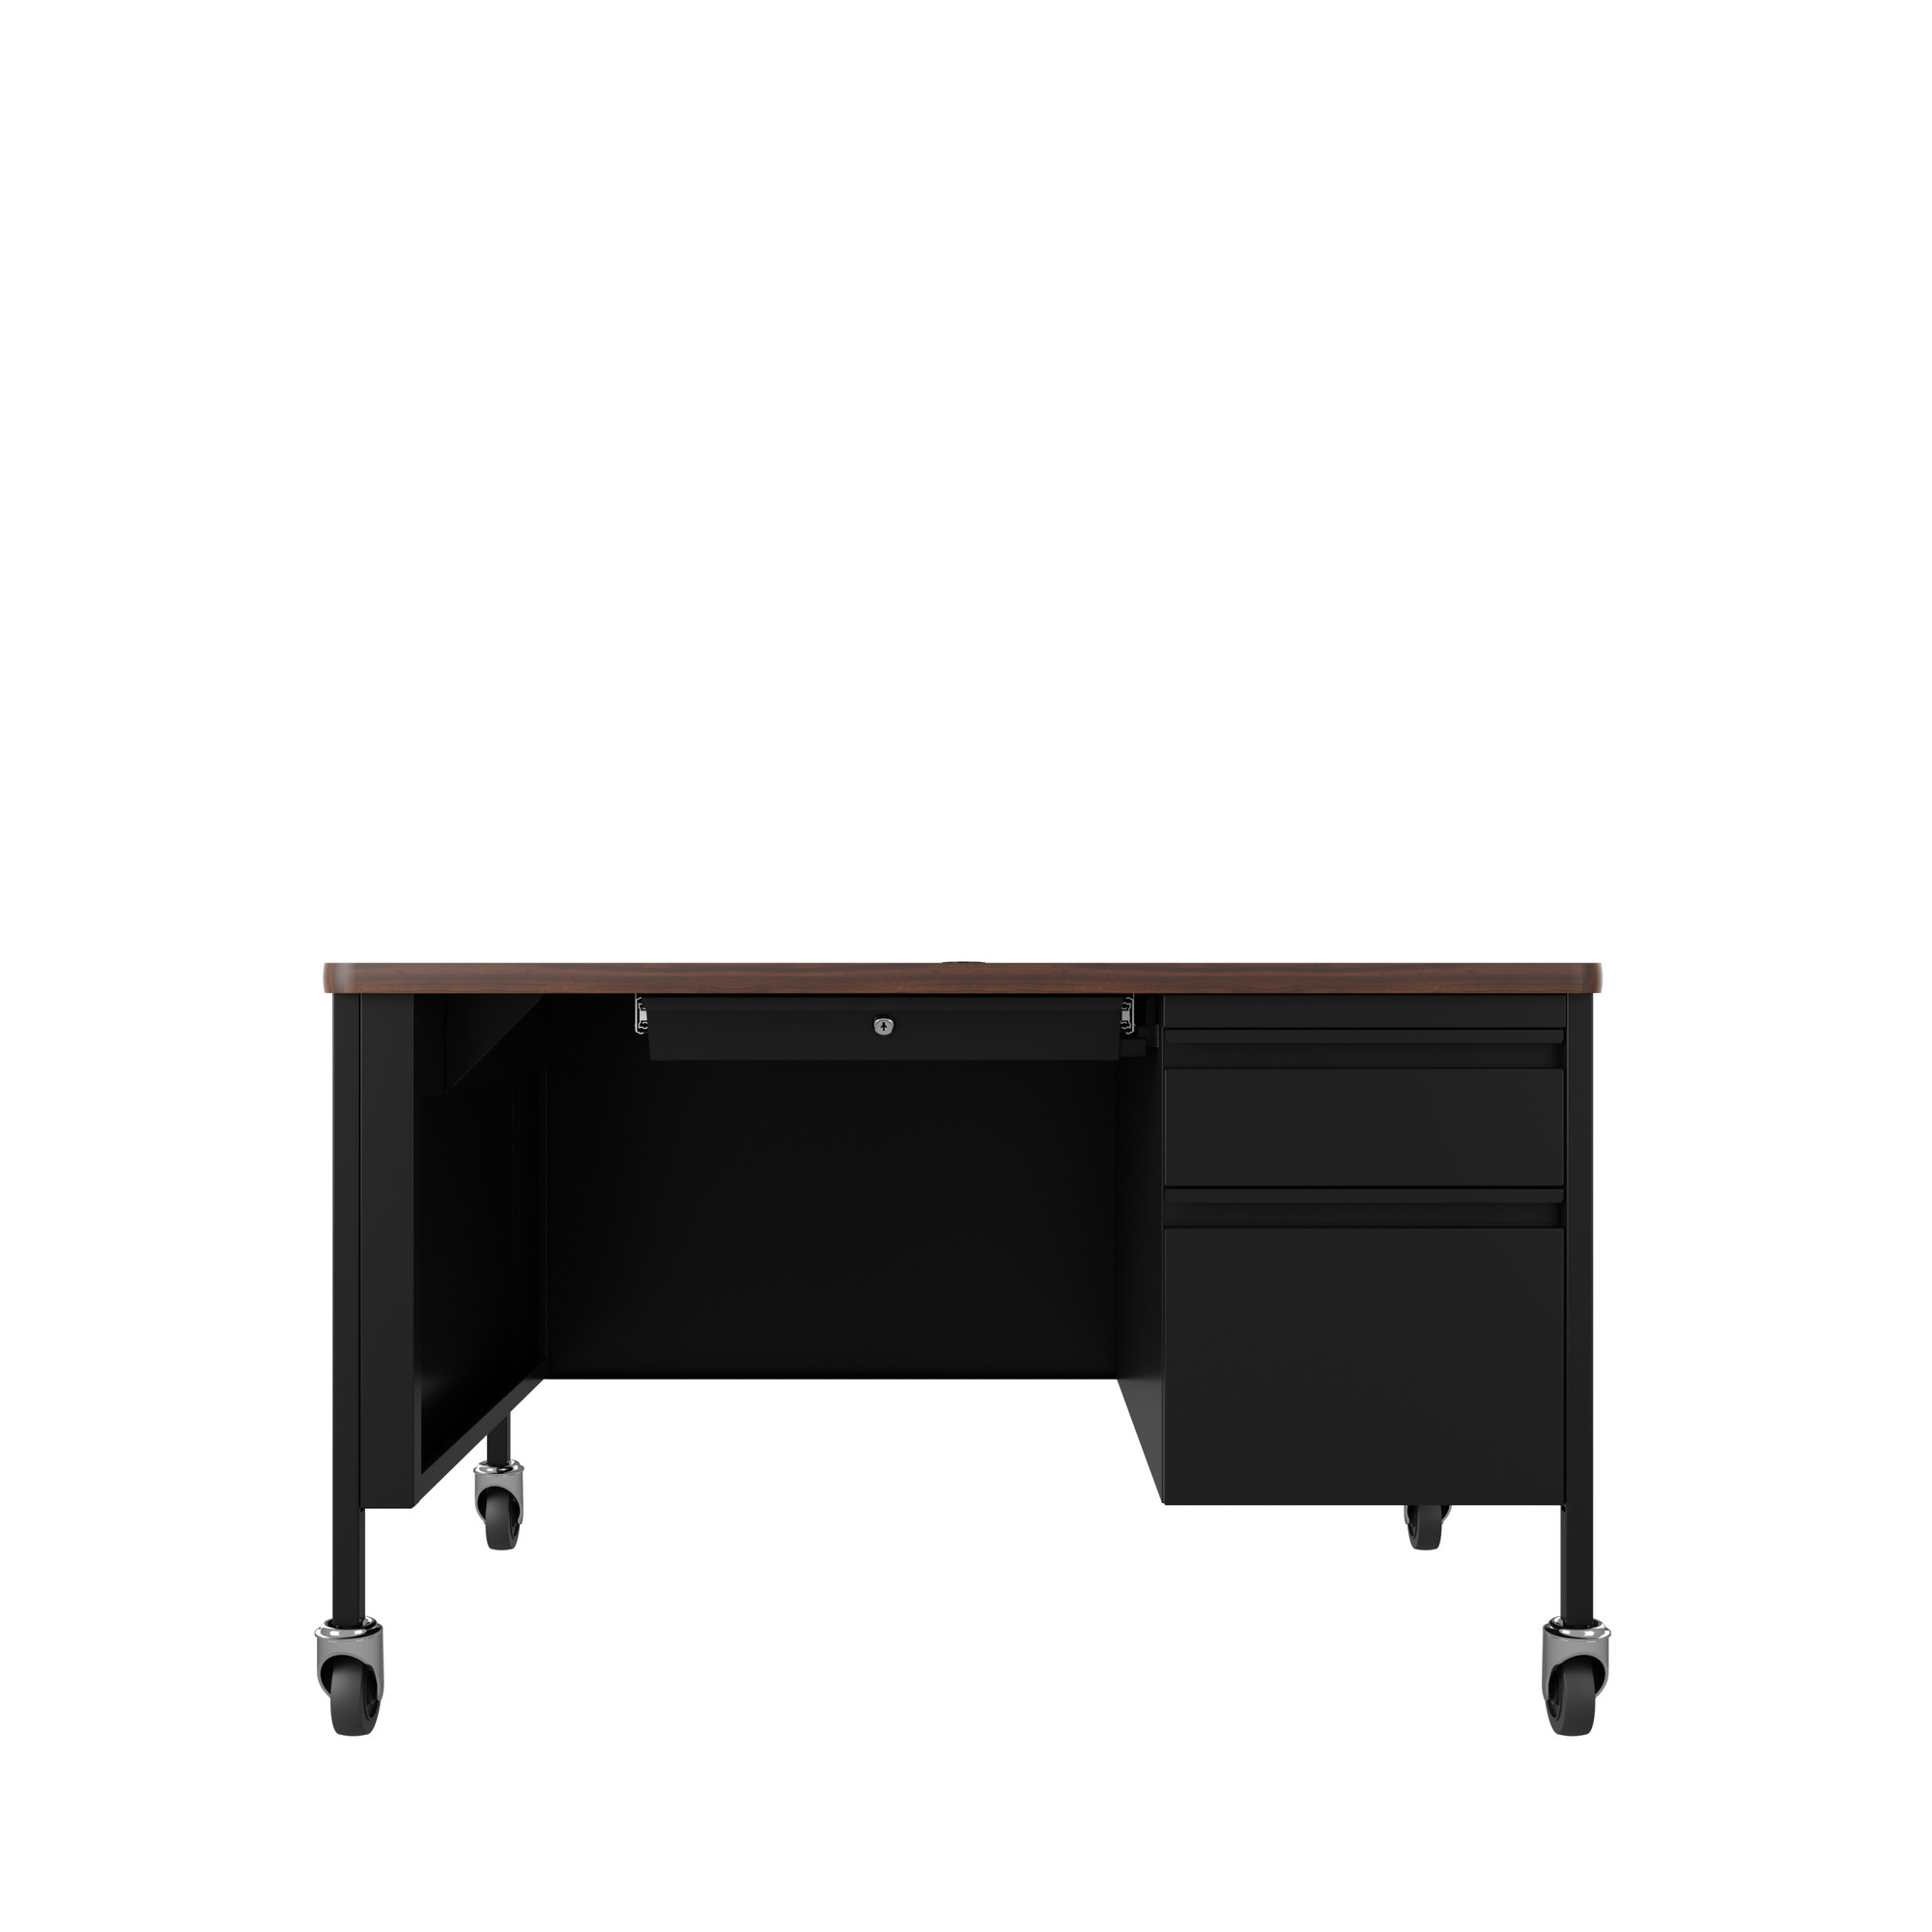 Hirsh Industries, Right Hand Ped Desk with Rounded Corner T-Mold Top, Width 48 in, Height 29.5 in, Depth 30 in, Model 22656